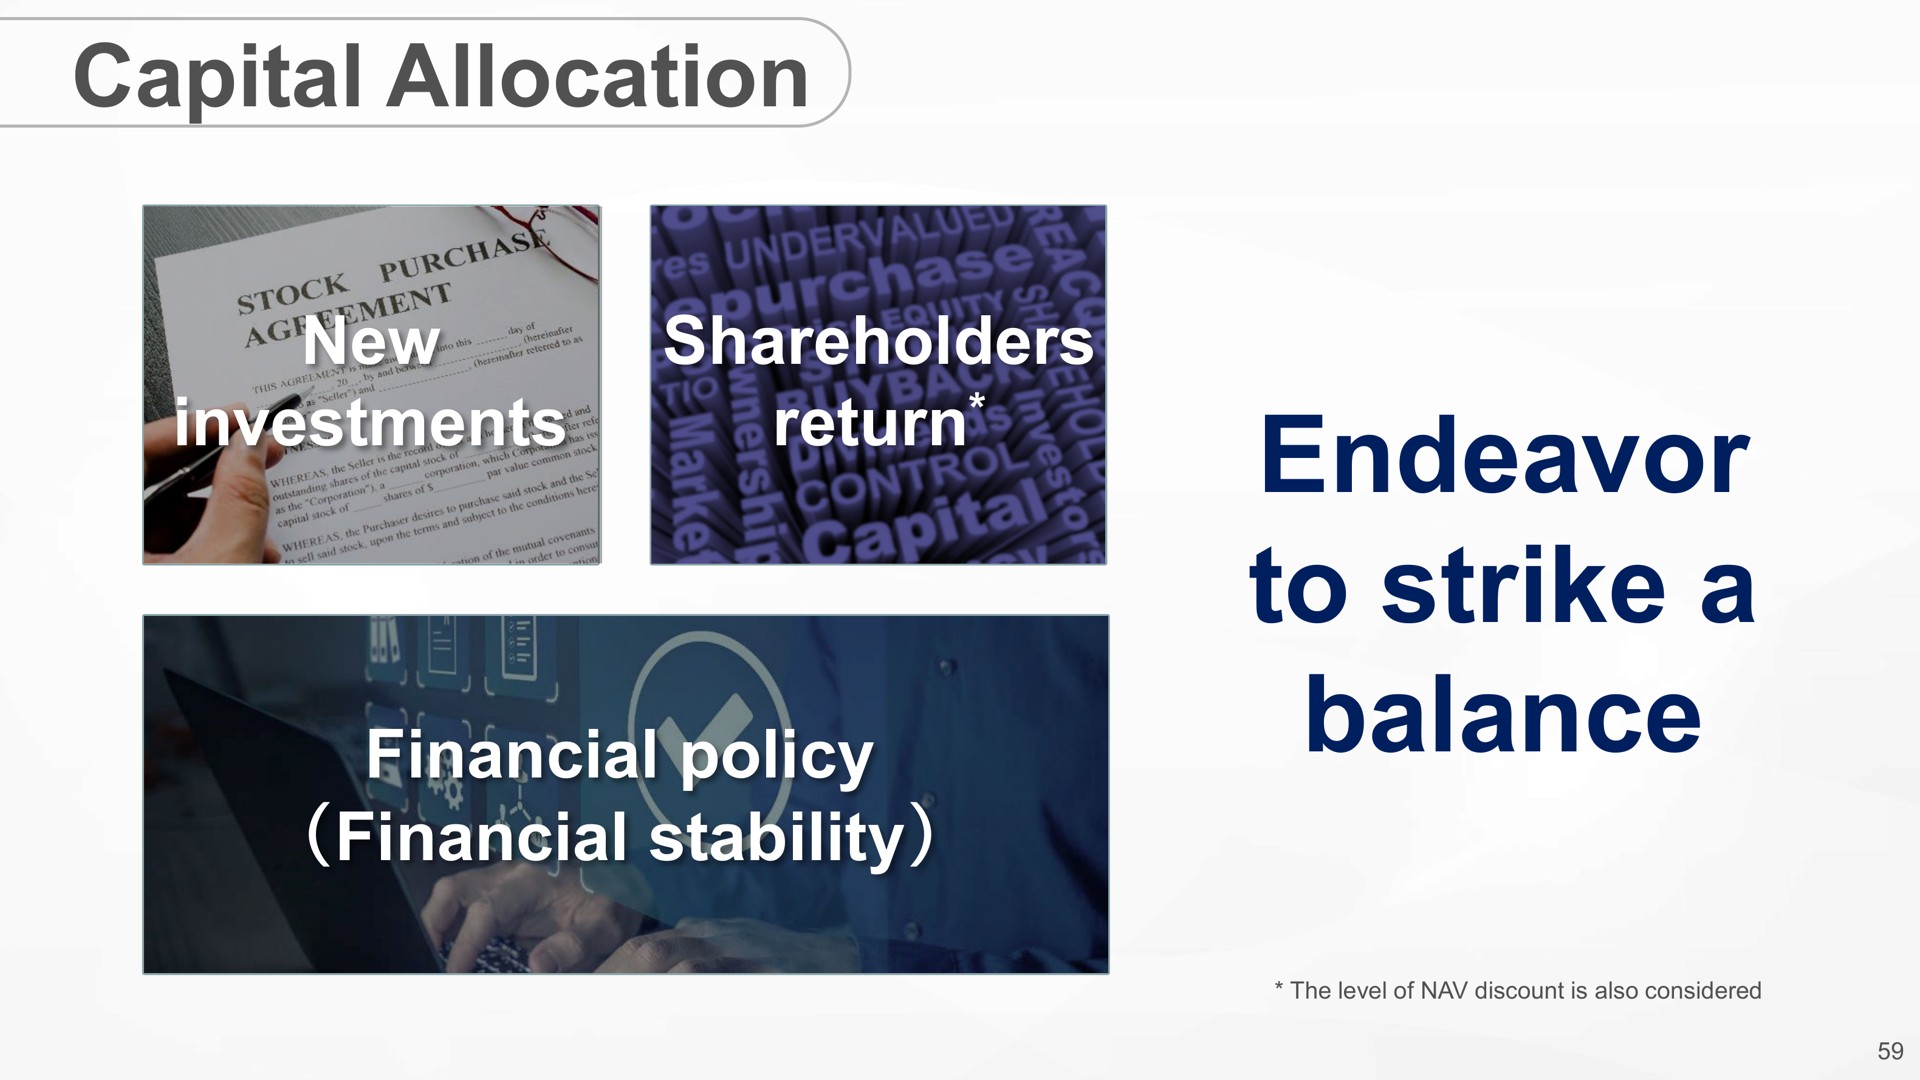 capital allocation new investments shareholders return financial policy financial stability endeavor to strike a balance hud | SoftBank